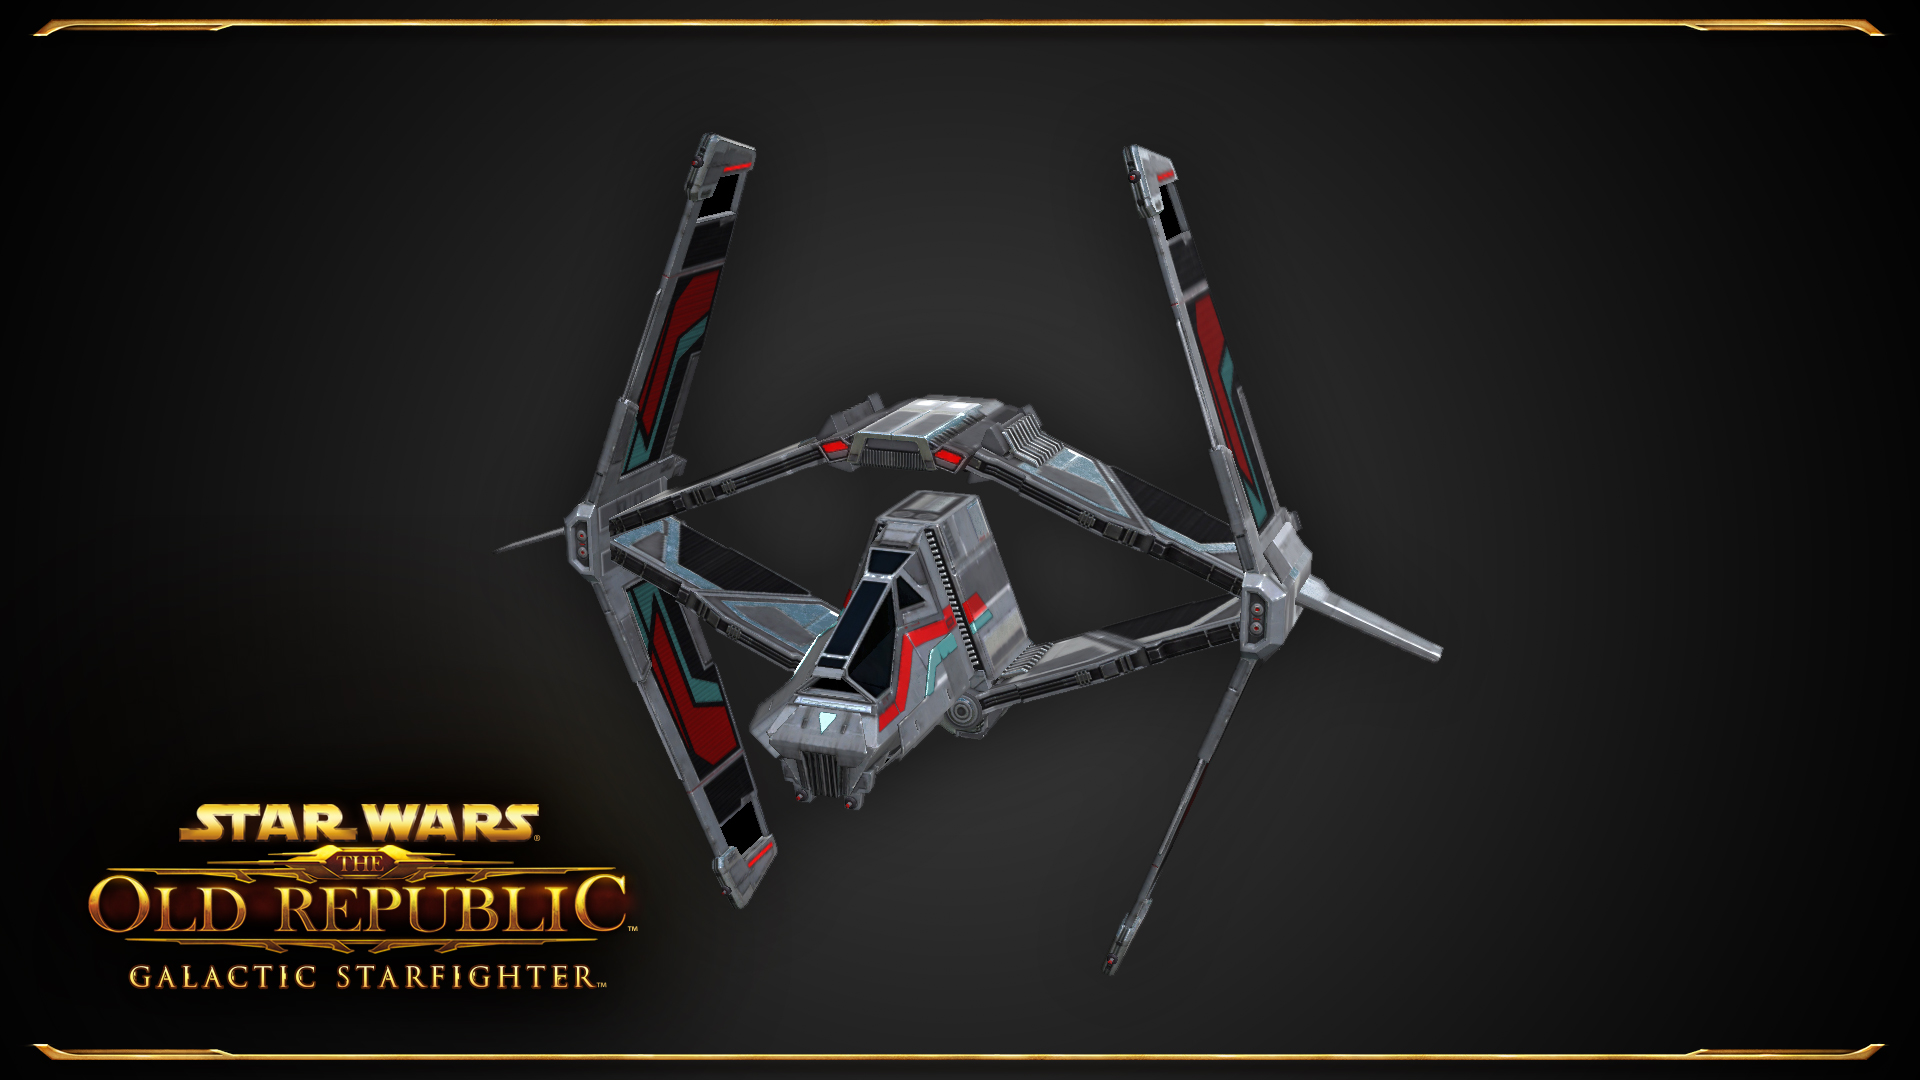 Star Wars The Old Republic Galactic Starfighter Artwork 011